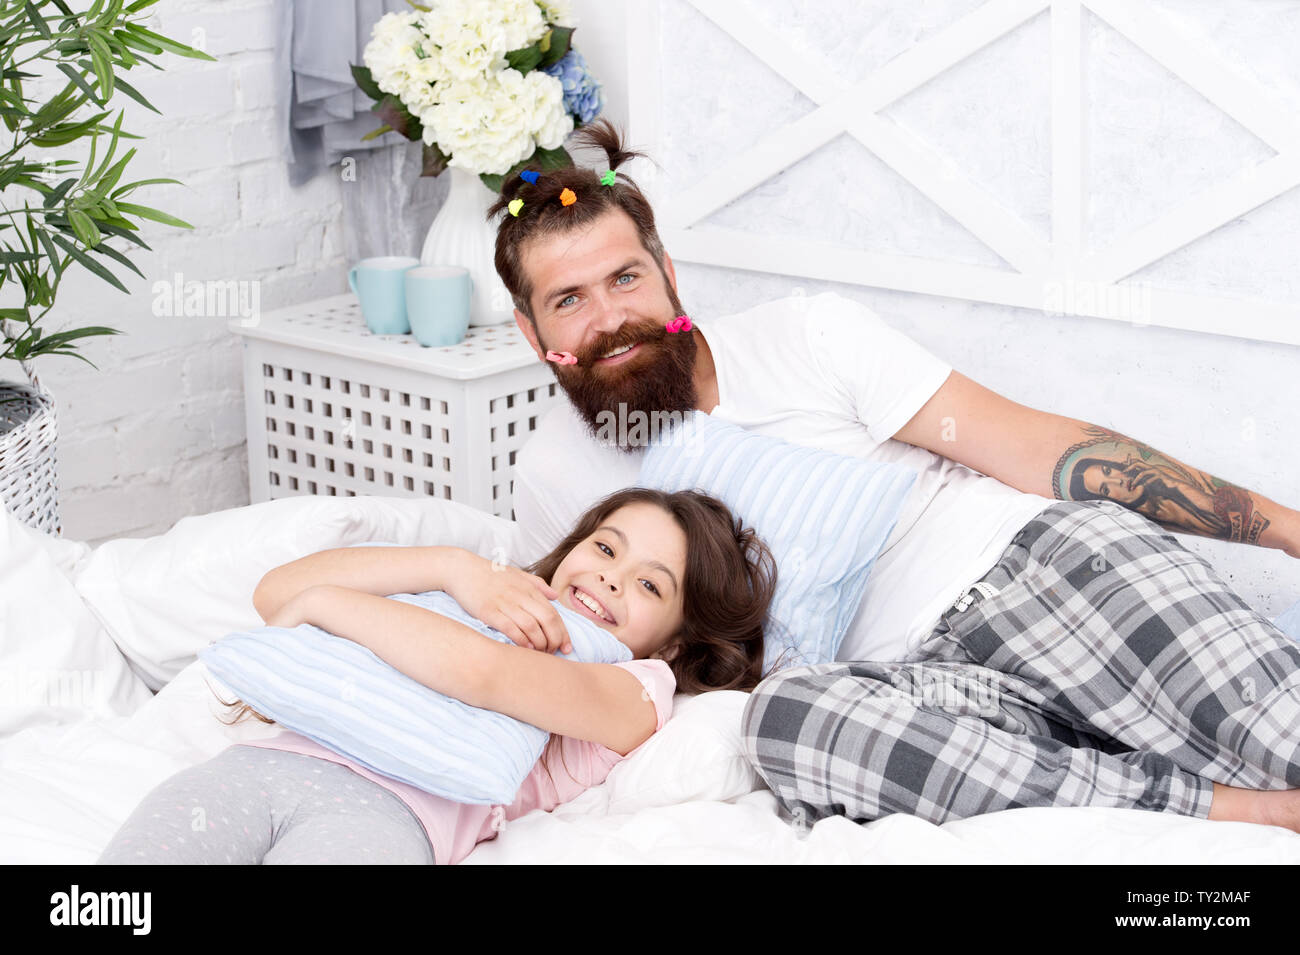 Guy and girl relaxing in bedroom. Pajamas style. Having fun pajamas party.  Happy fatherhood. Man bearded hipster with childish hairstyle colorful  ponytails and daughter in pajamas. Slumber party Stock Photo - Alamy